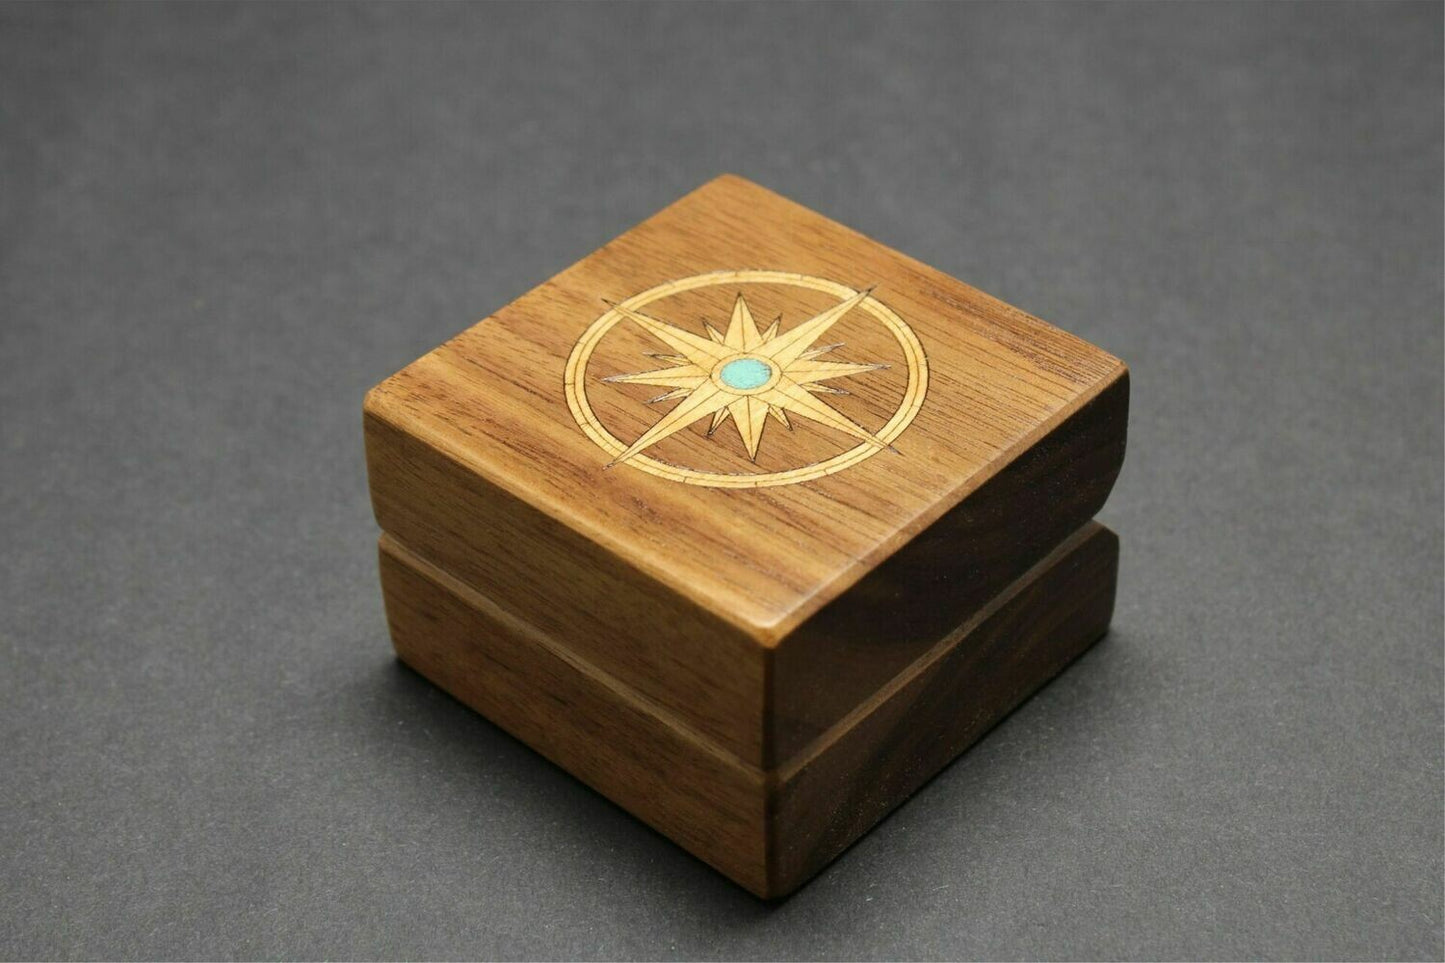 Handcrafted Walnut Ring Box - "Compass"  RB-17   Made in the U.S.